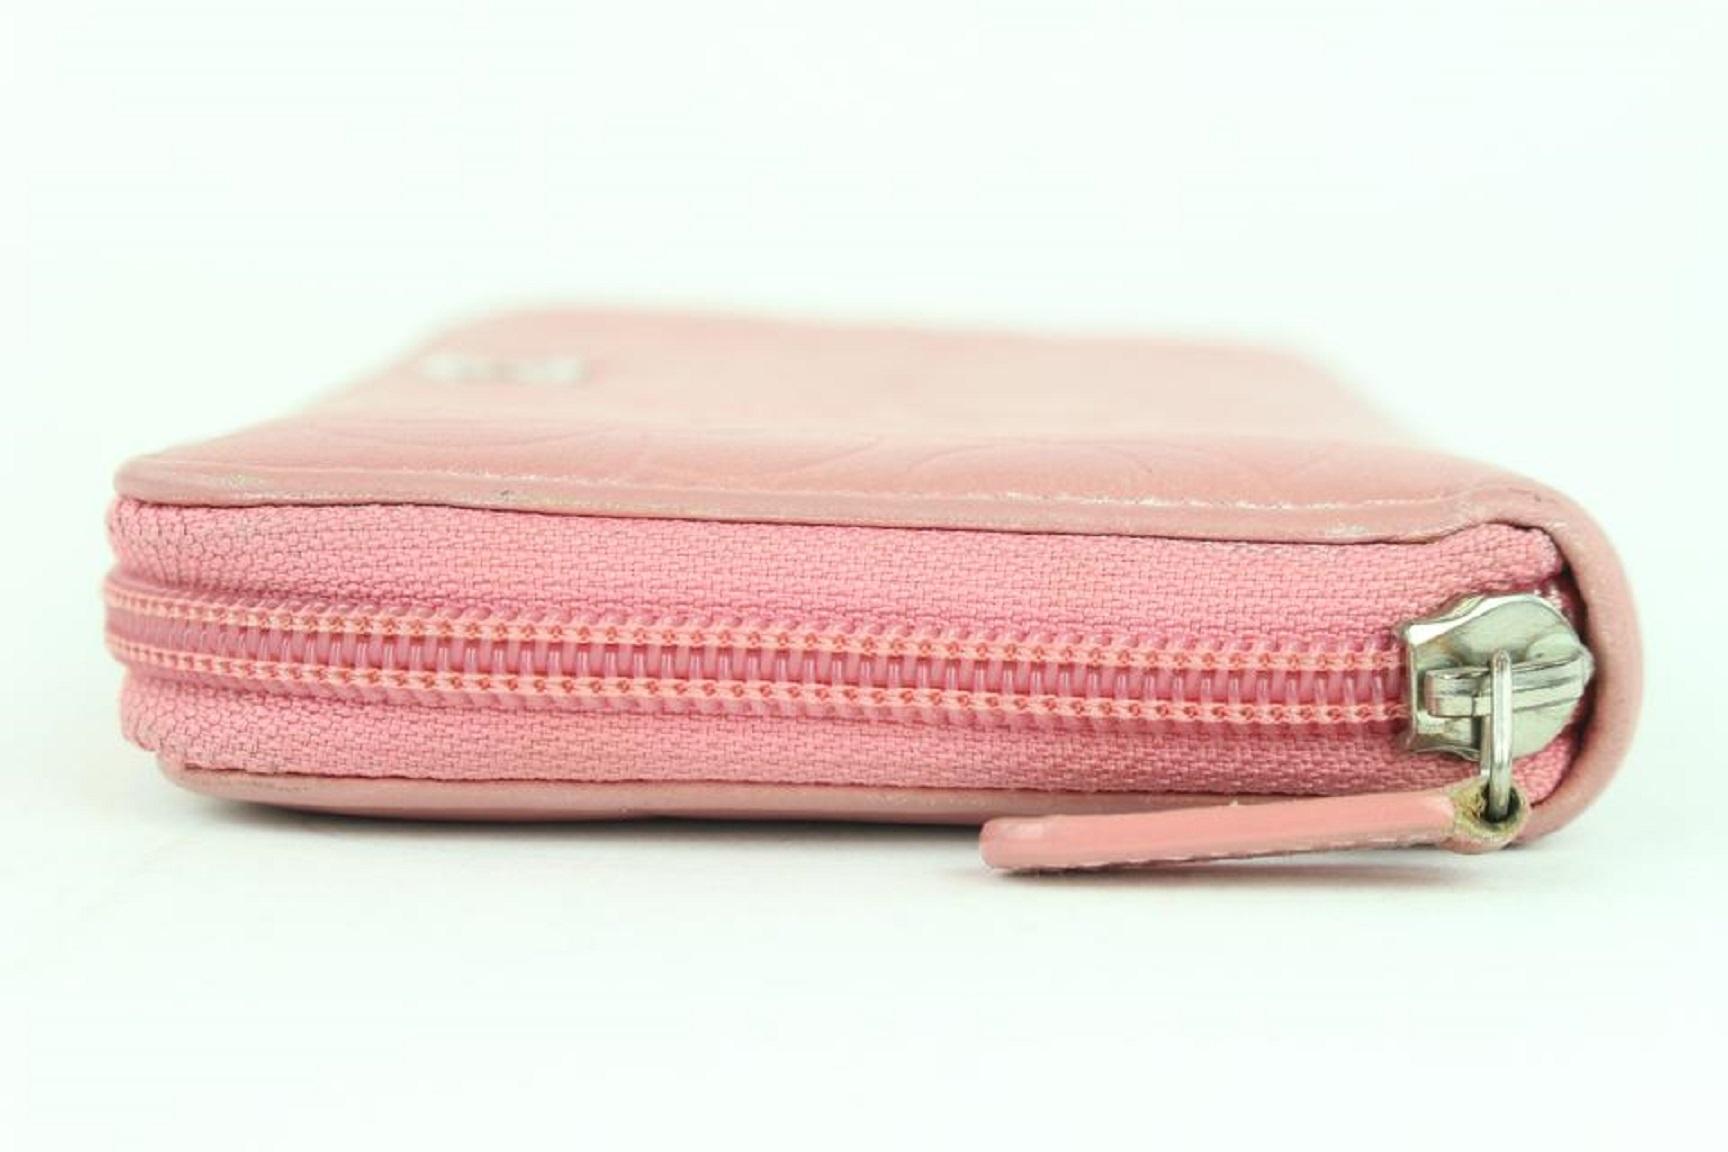 Chanel Embossed Camellia Gusset Zip Around Wallet 2cj1110 Pink Leather Clutch For Sale 7